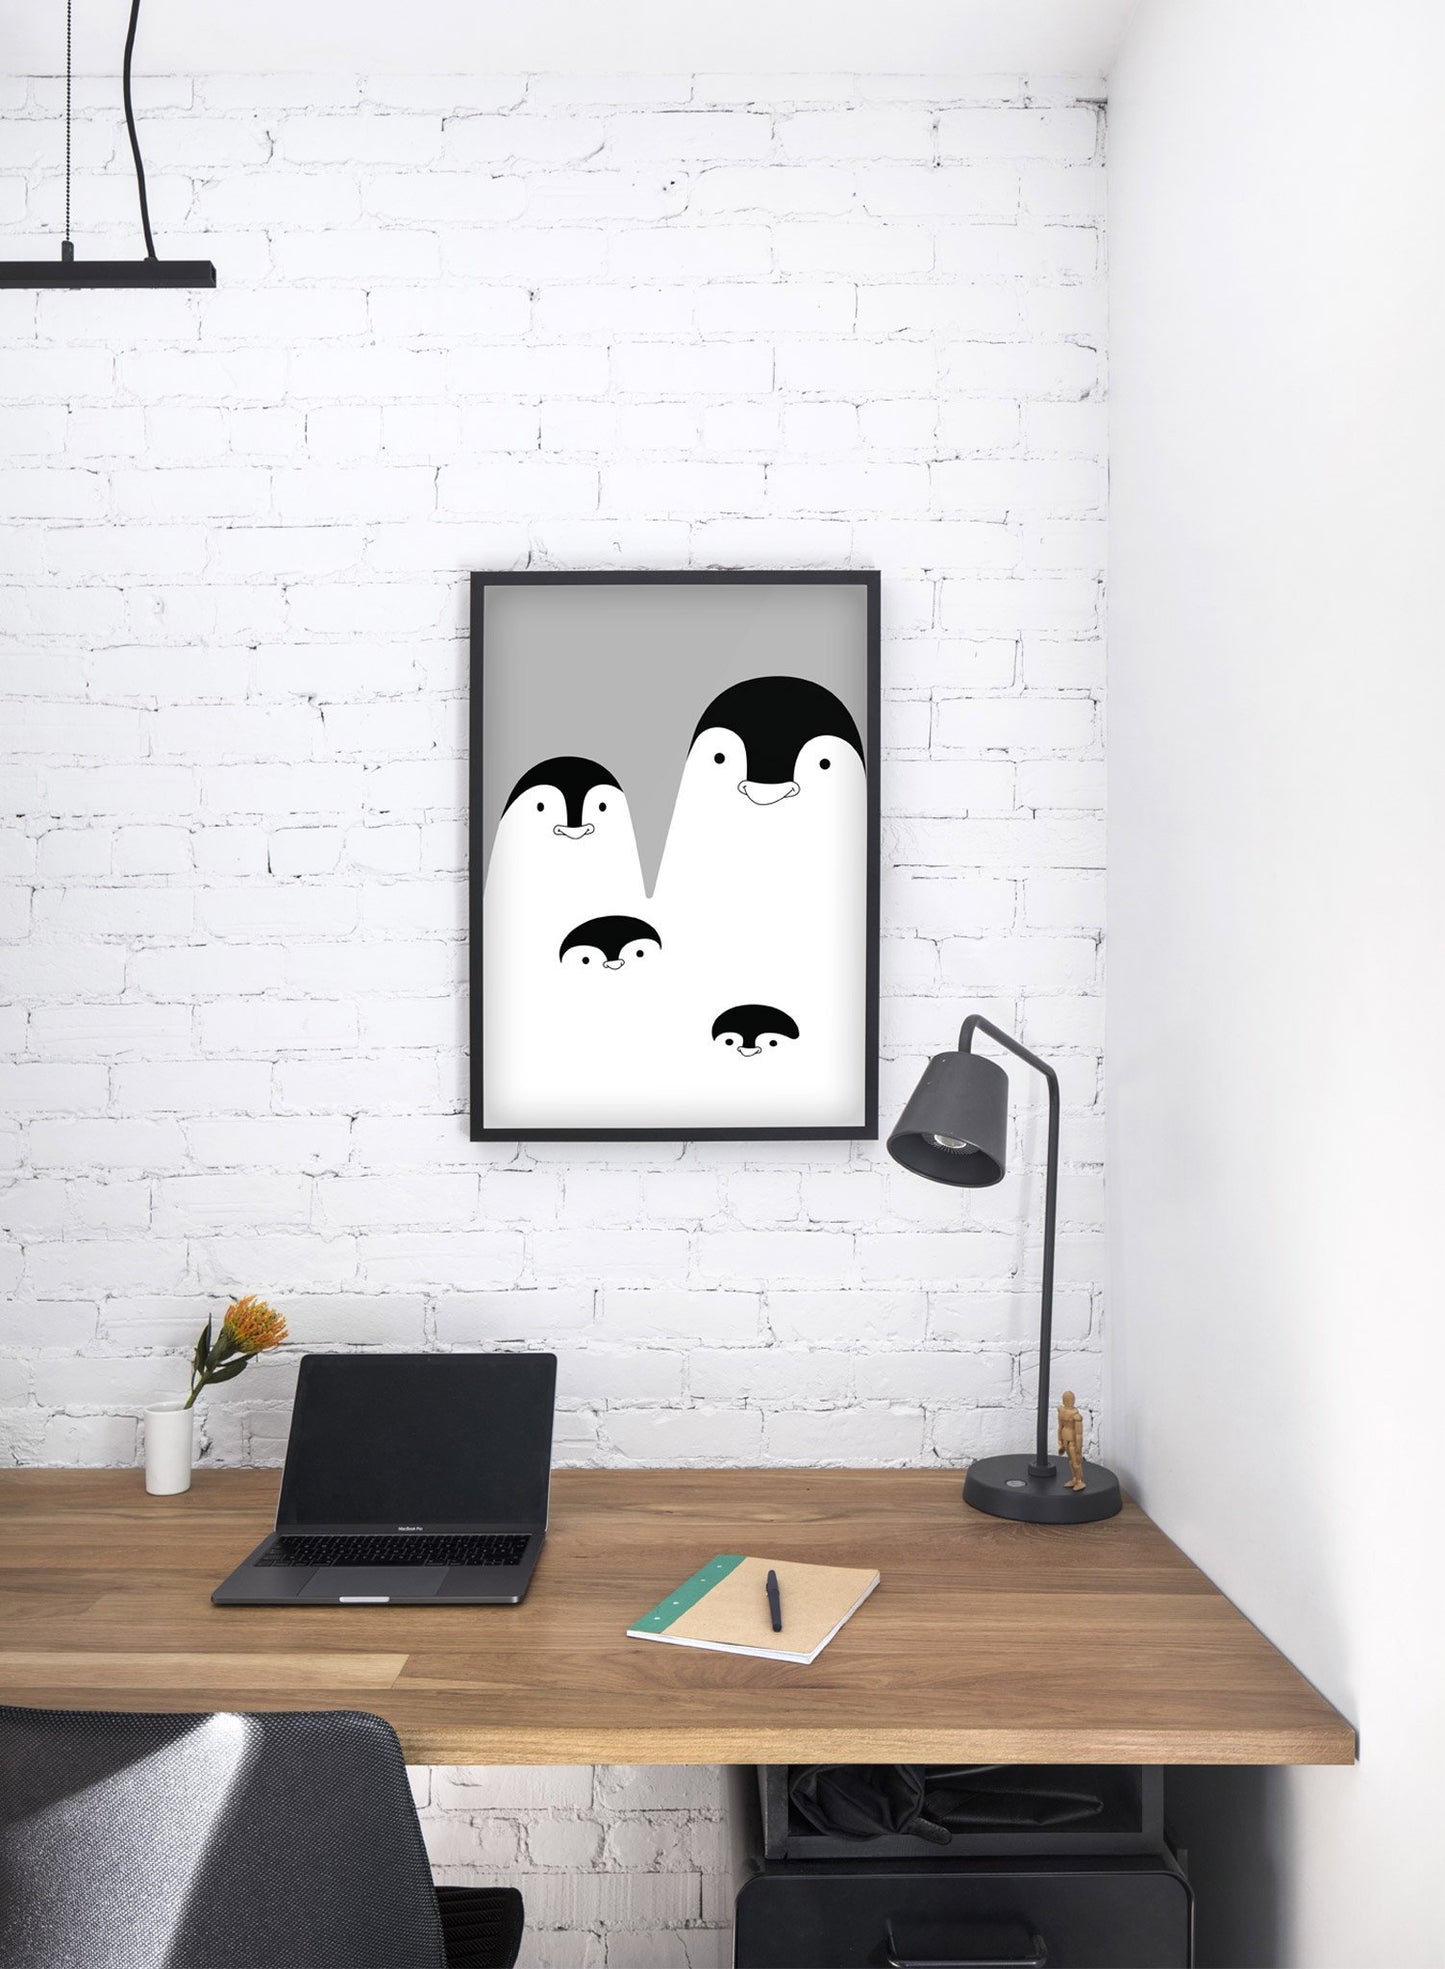 Modern minimalist poster by Opposite Wall with an illustration of a penguin family in black and white - kids collection - office desk